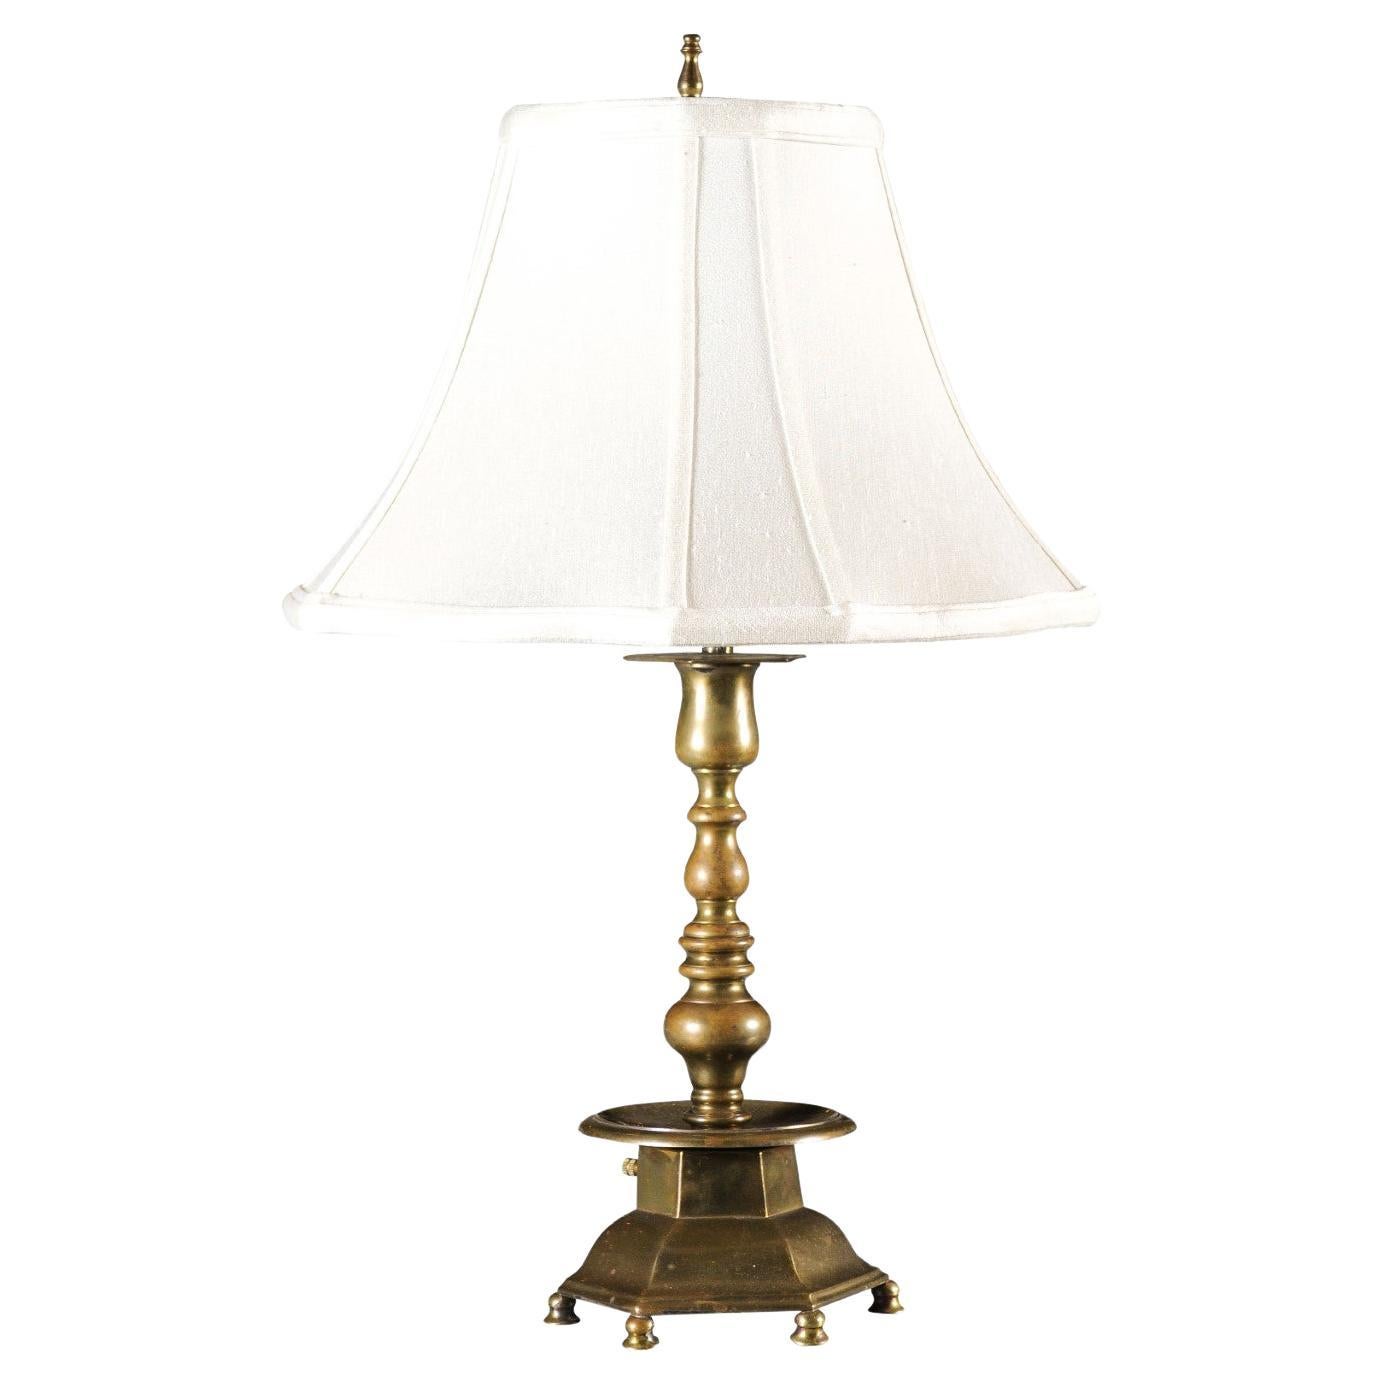 French Napoléon III Period 1870s Wired Brass Table Lamp with Hexagonal Base